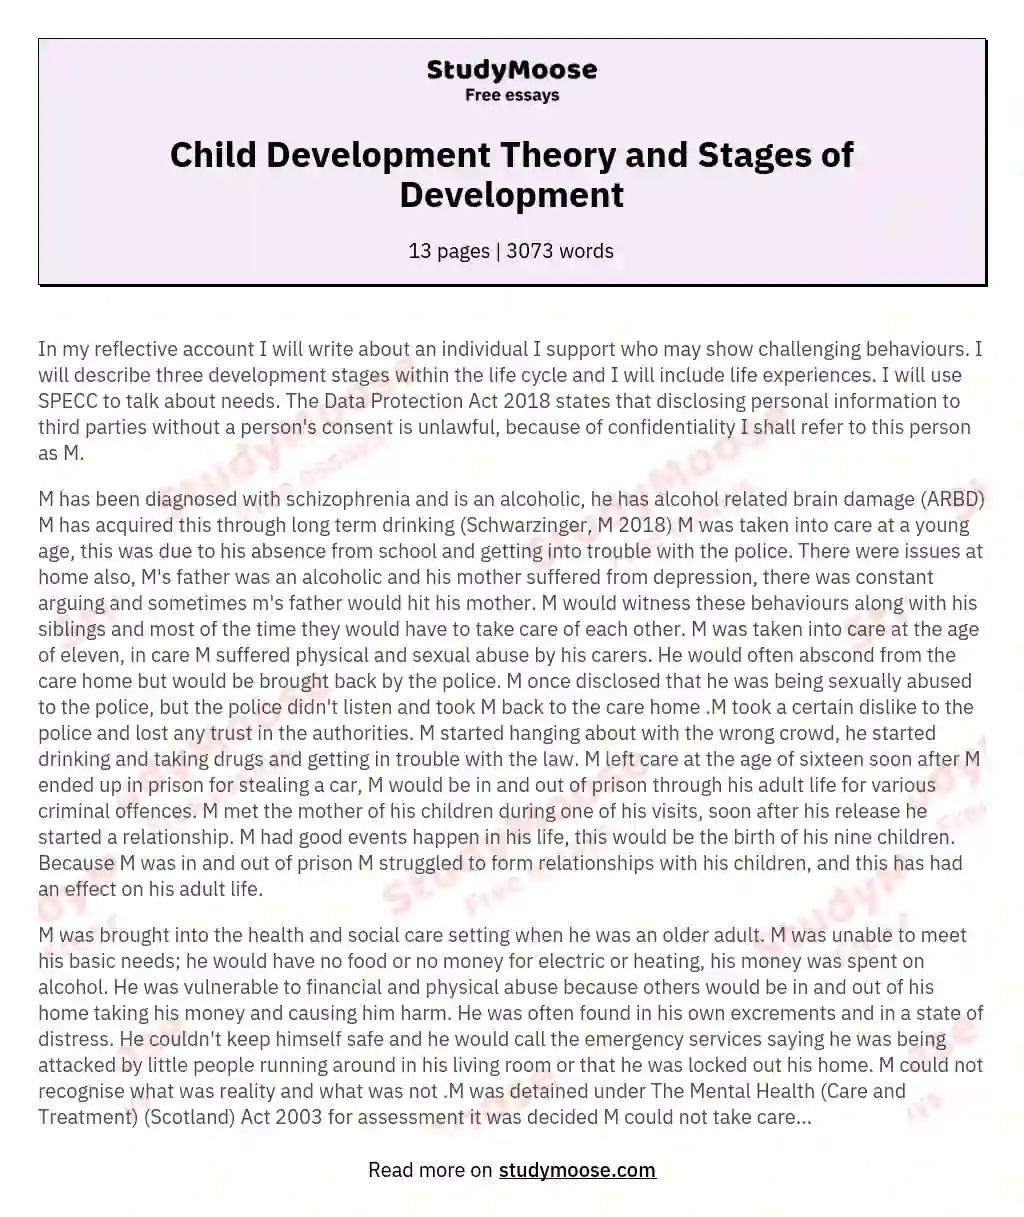 Child Development Theory and Stages of Development essay